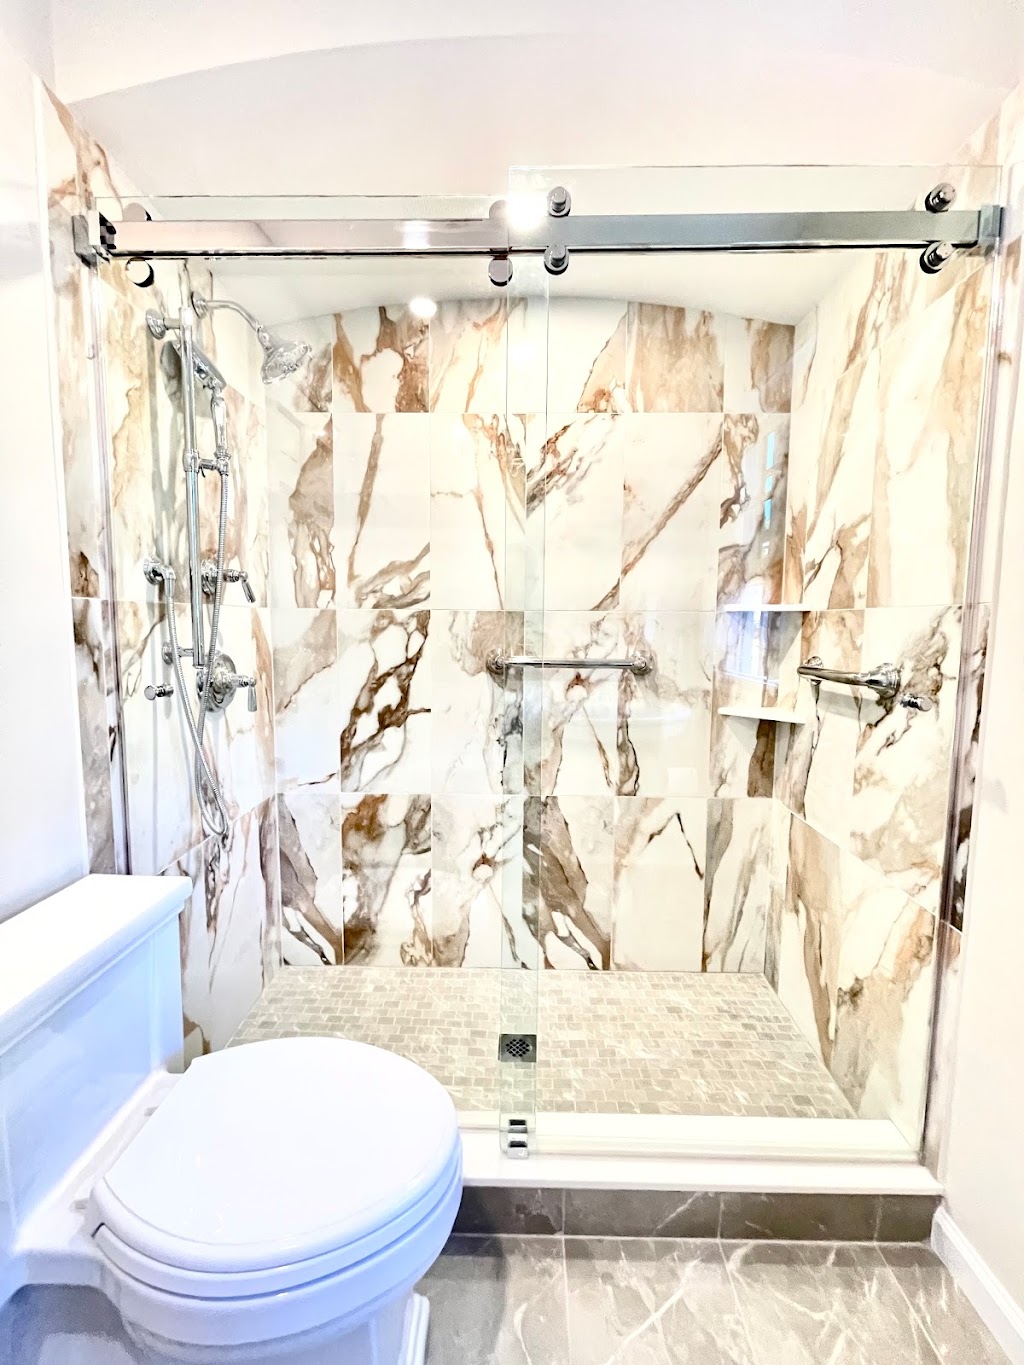 Strictly Shower Doors | No showroom location, 5 Lupi Ct Suite b, Mahopac, NY 10541 | Phone: (845) 621-5000